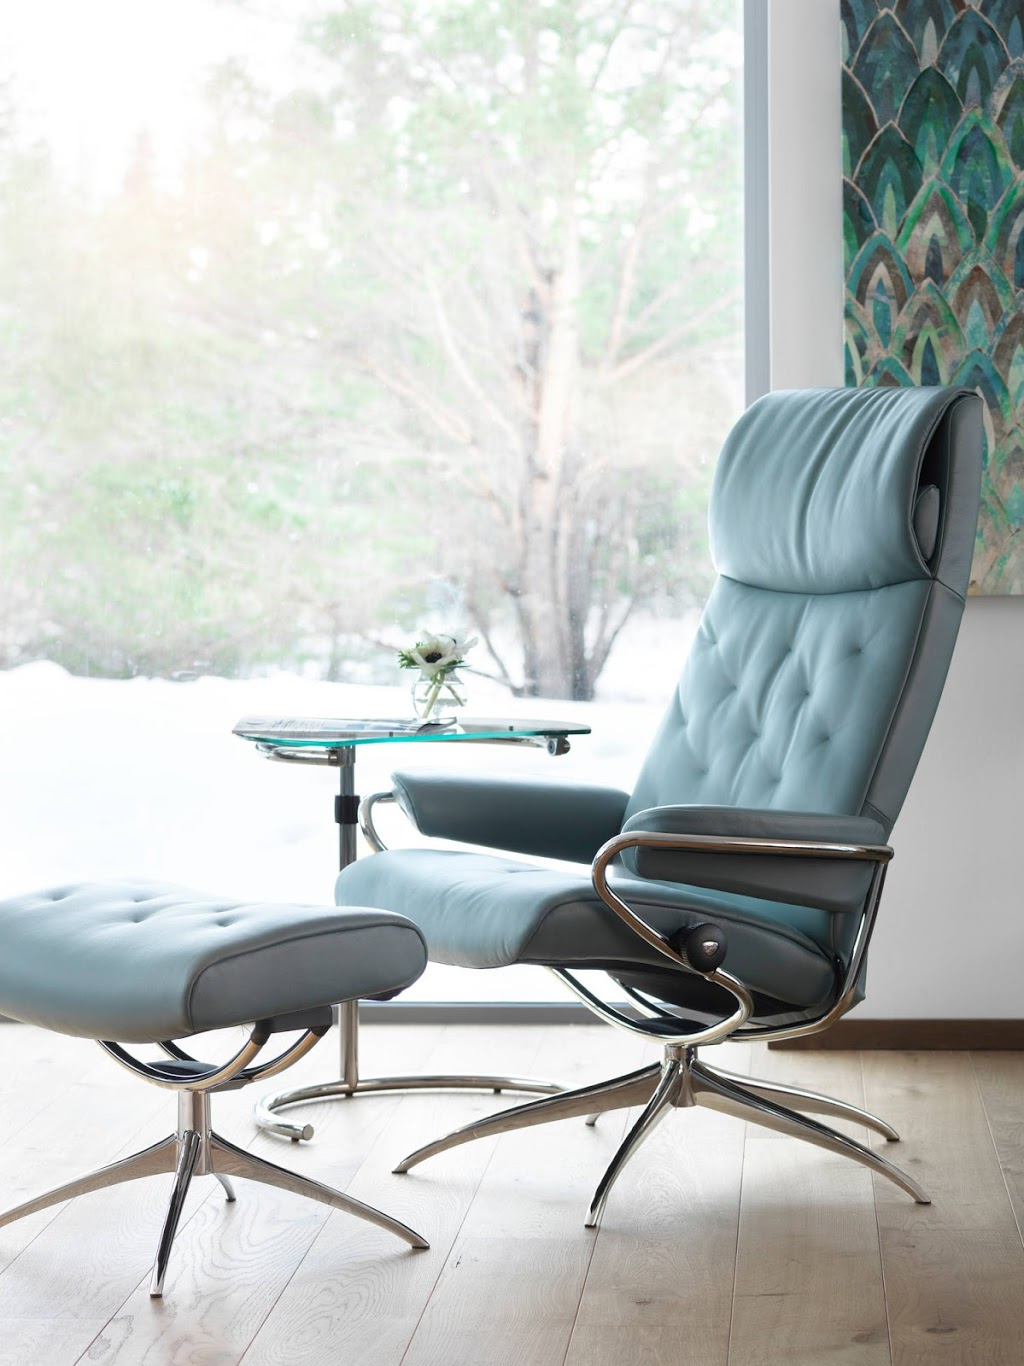 Stressless by Strictly Comfort | 368 Military Rd, Cremorne NSW 2090, Australia | Phone: (02) 9953 5312